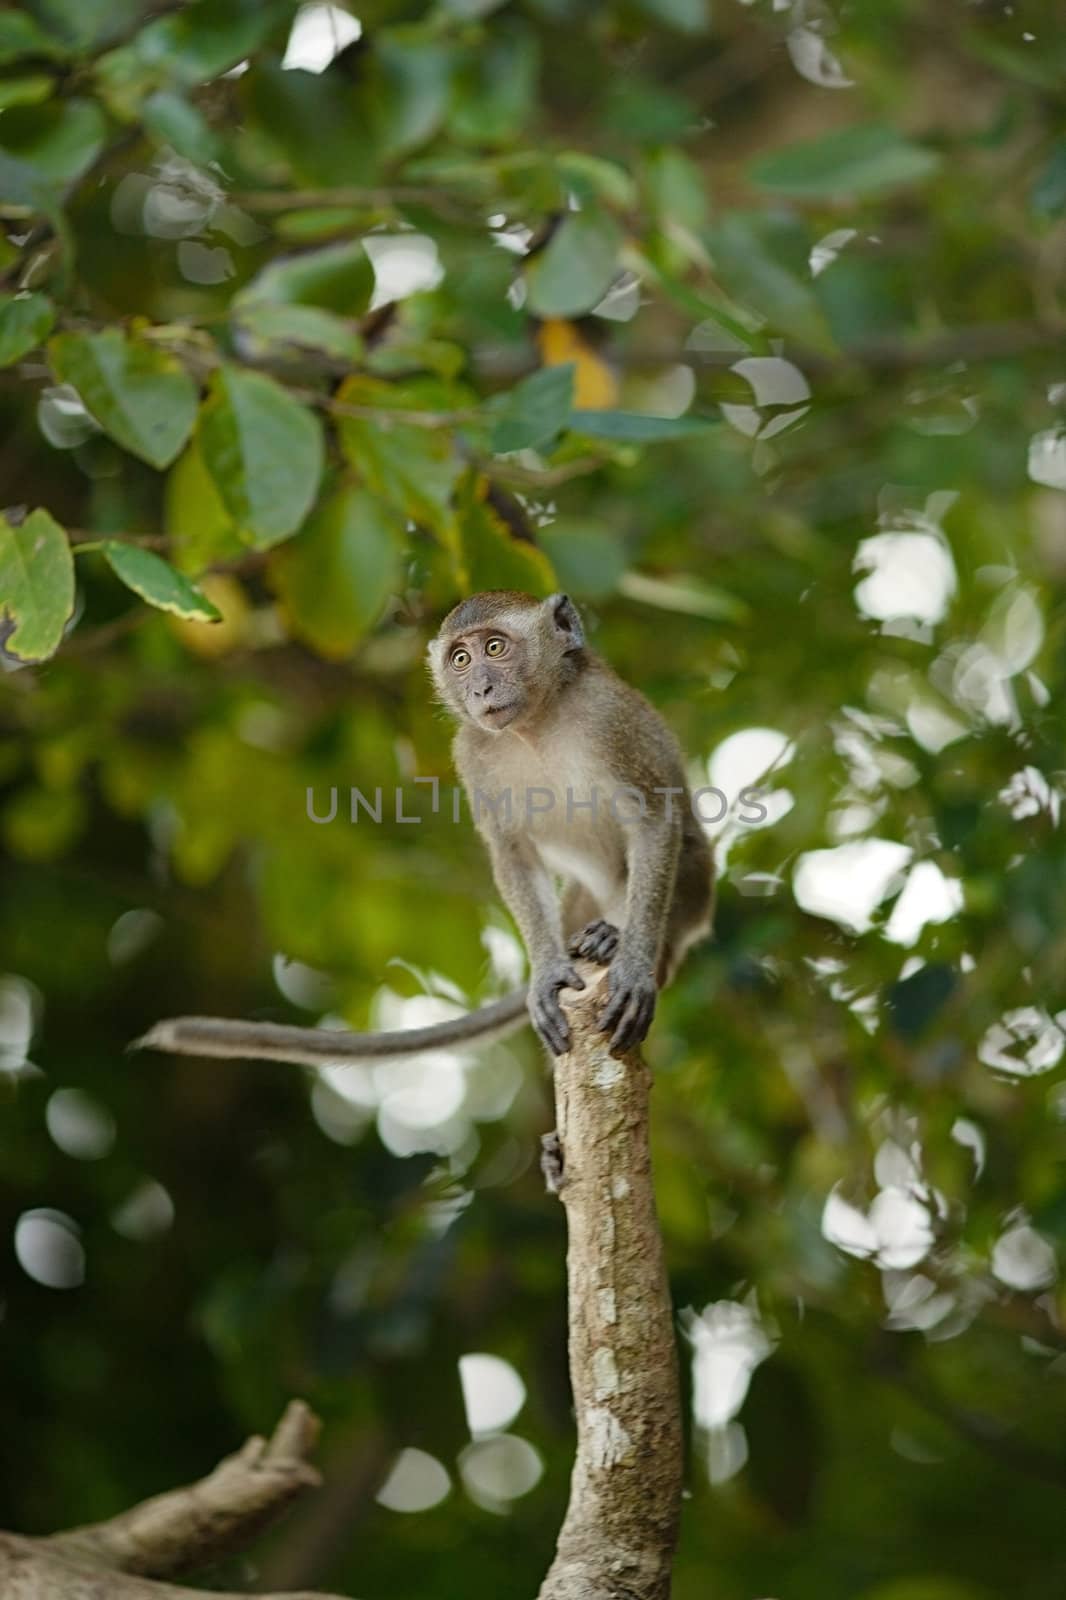 macaque monkey sitting on tree and ready to jump